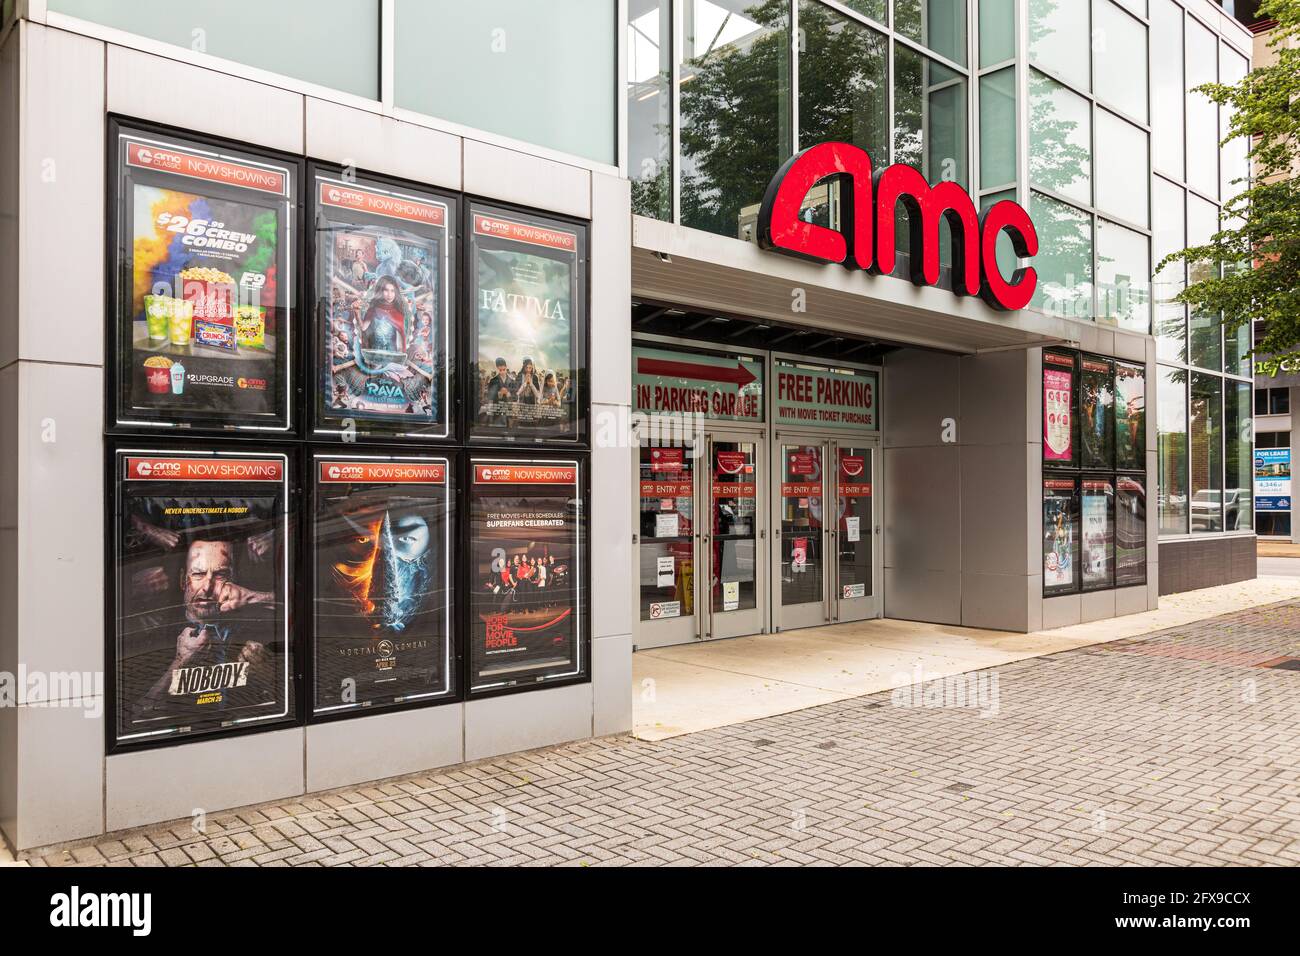 Have you been to our new AMC Theater!? 😍, AMC Theatres, movie theater, Have you been to our new AMC Theaters!? 😍, By Westfield Topanga